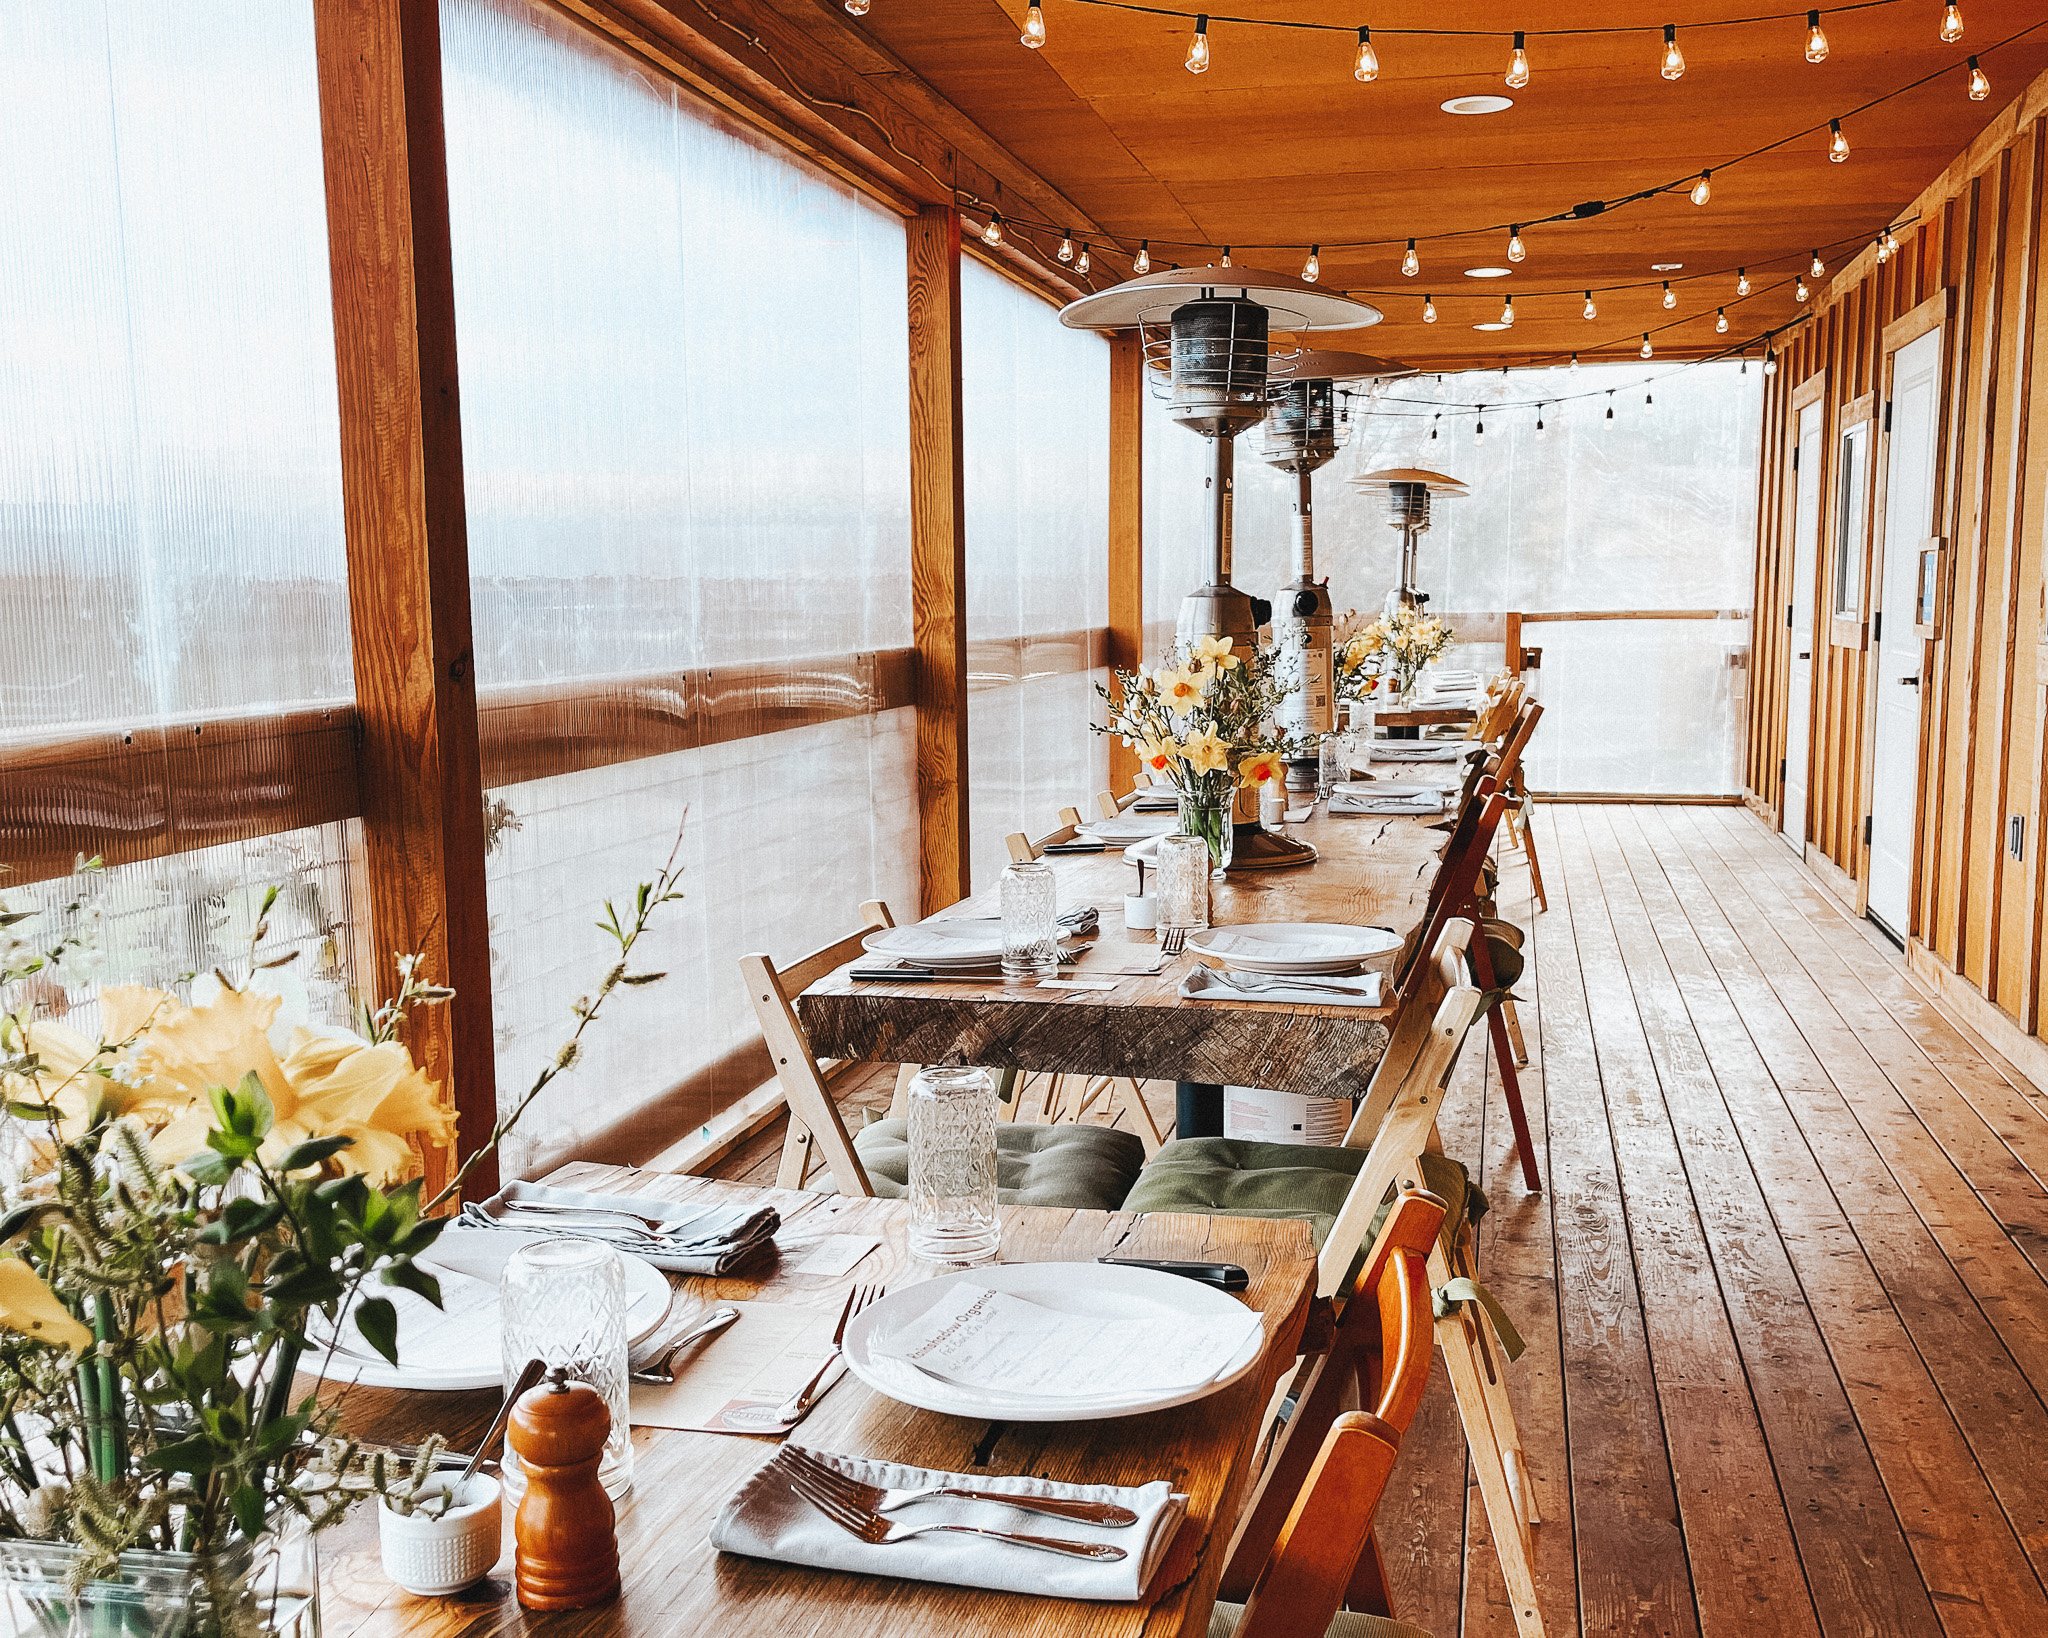 tables along a deck with plates, flowers, string lights and heat lamps